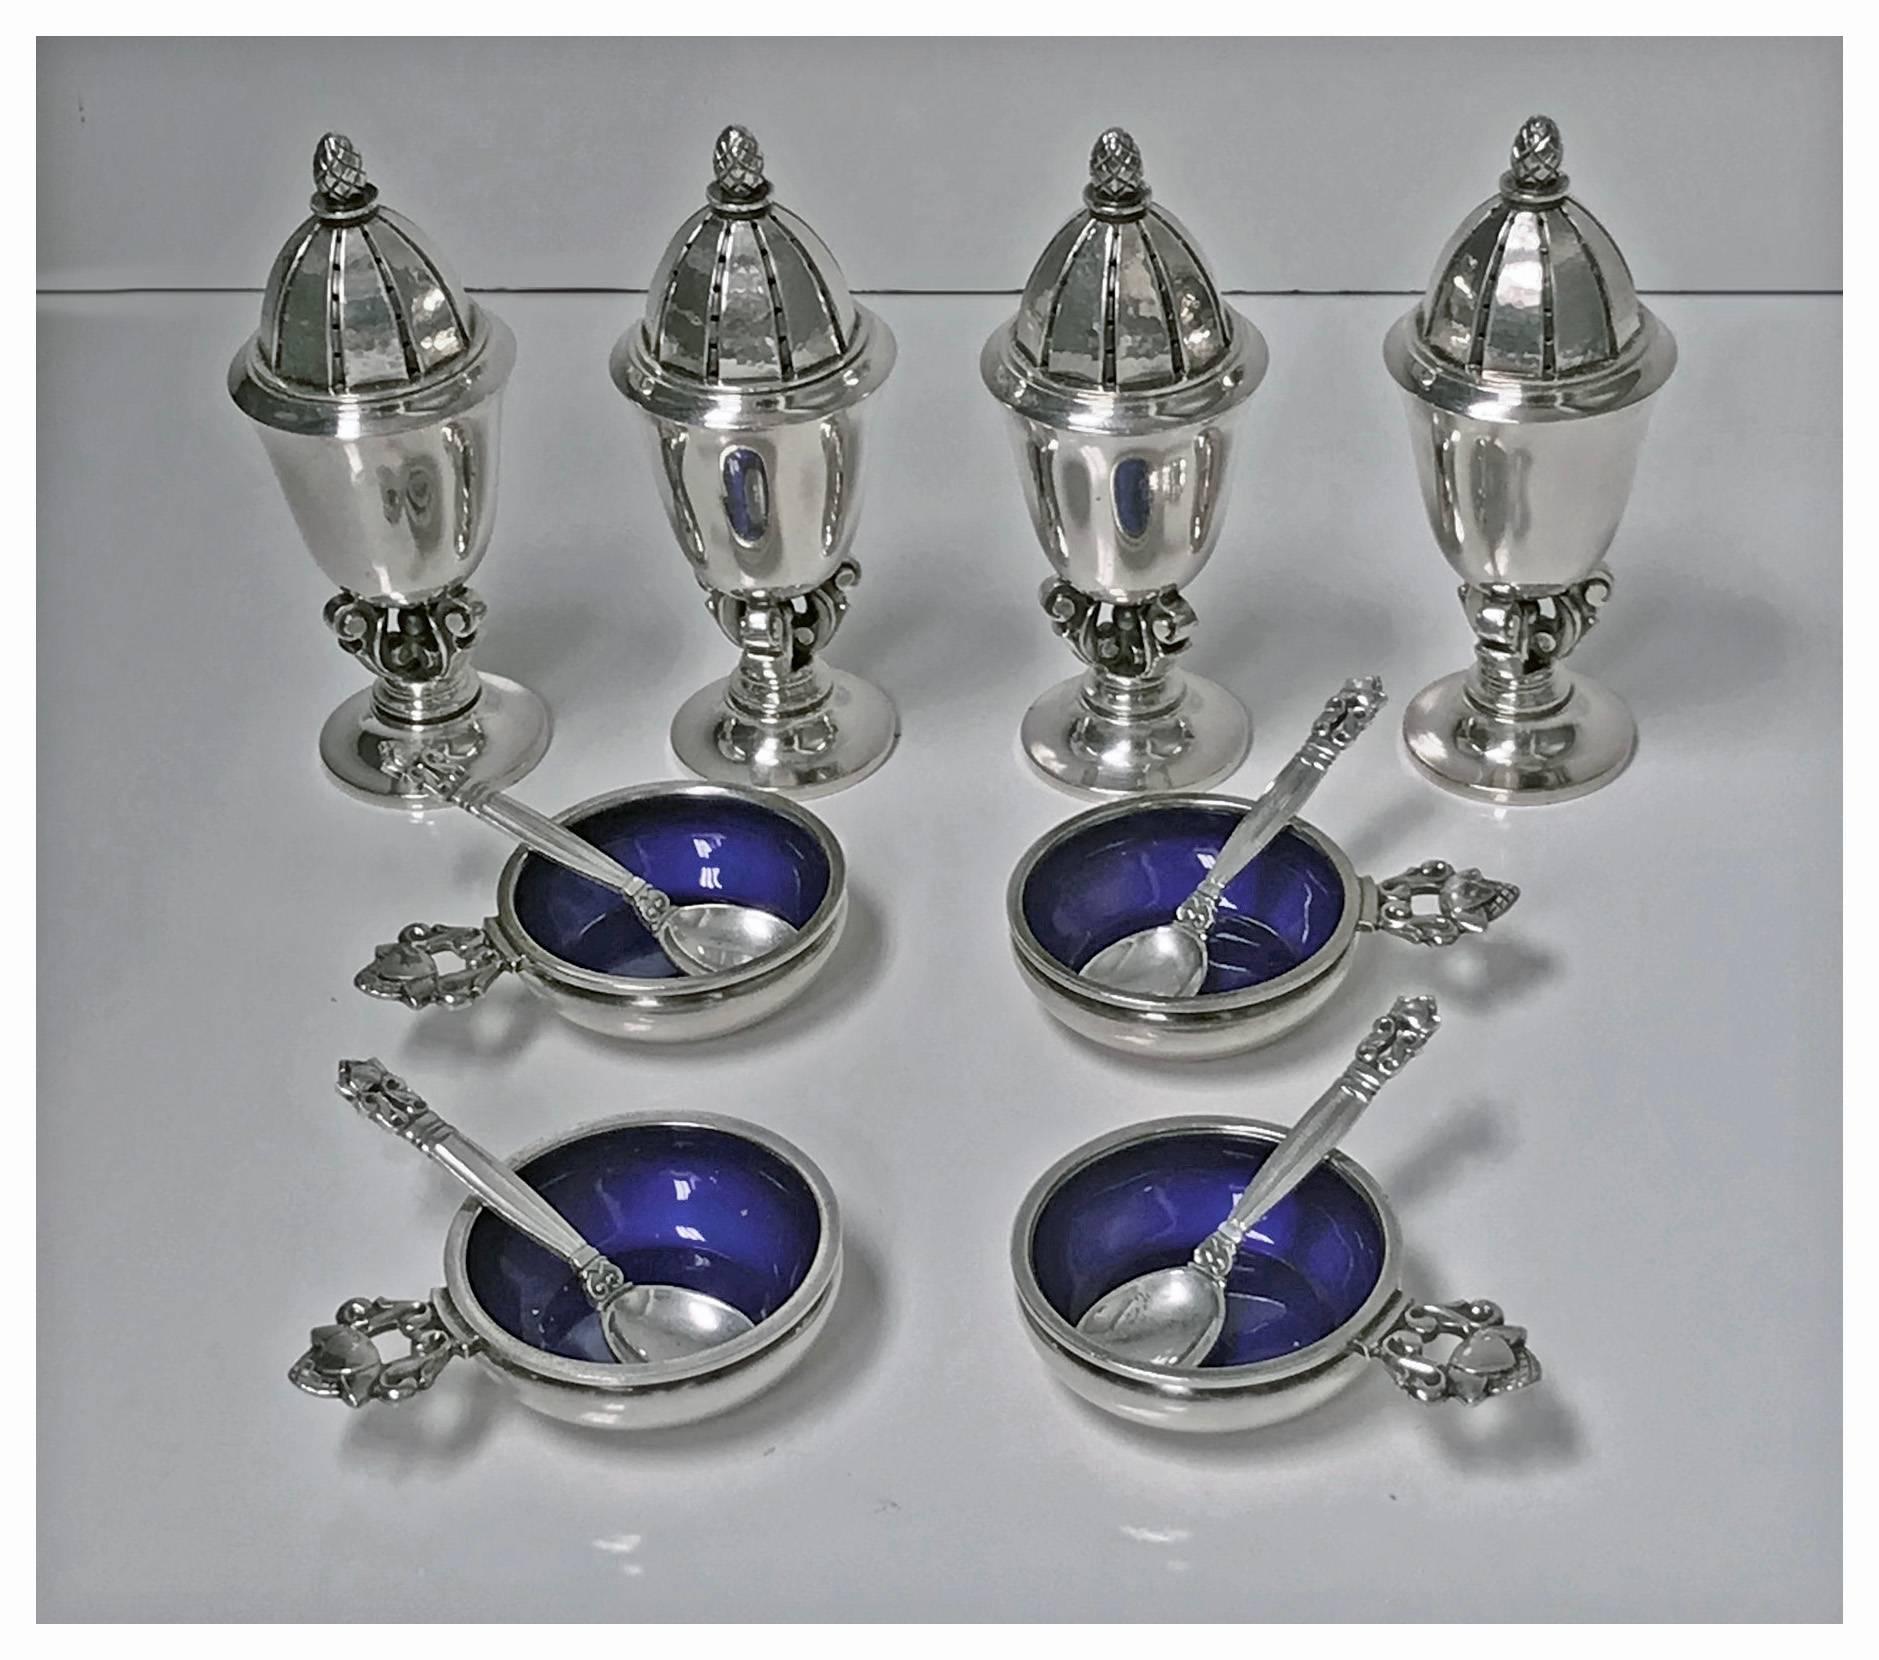 Four sets of Georg Jensen sterling salt dishes, pepper shakers and spoons, post-1945, no. 741, designed by Johan Rohde, acorn pattern. The casters urn form, with pineapple finials, vertically reeded lids, on trefoil openwork scroll base and small